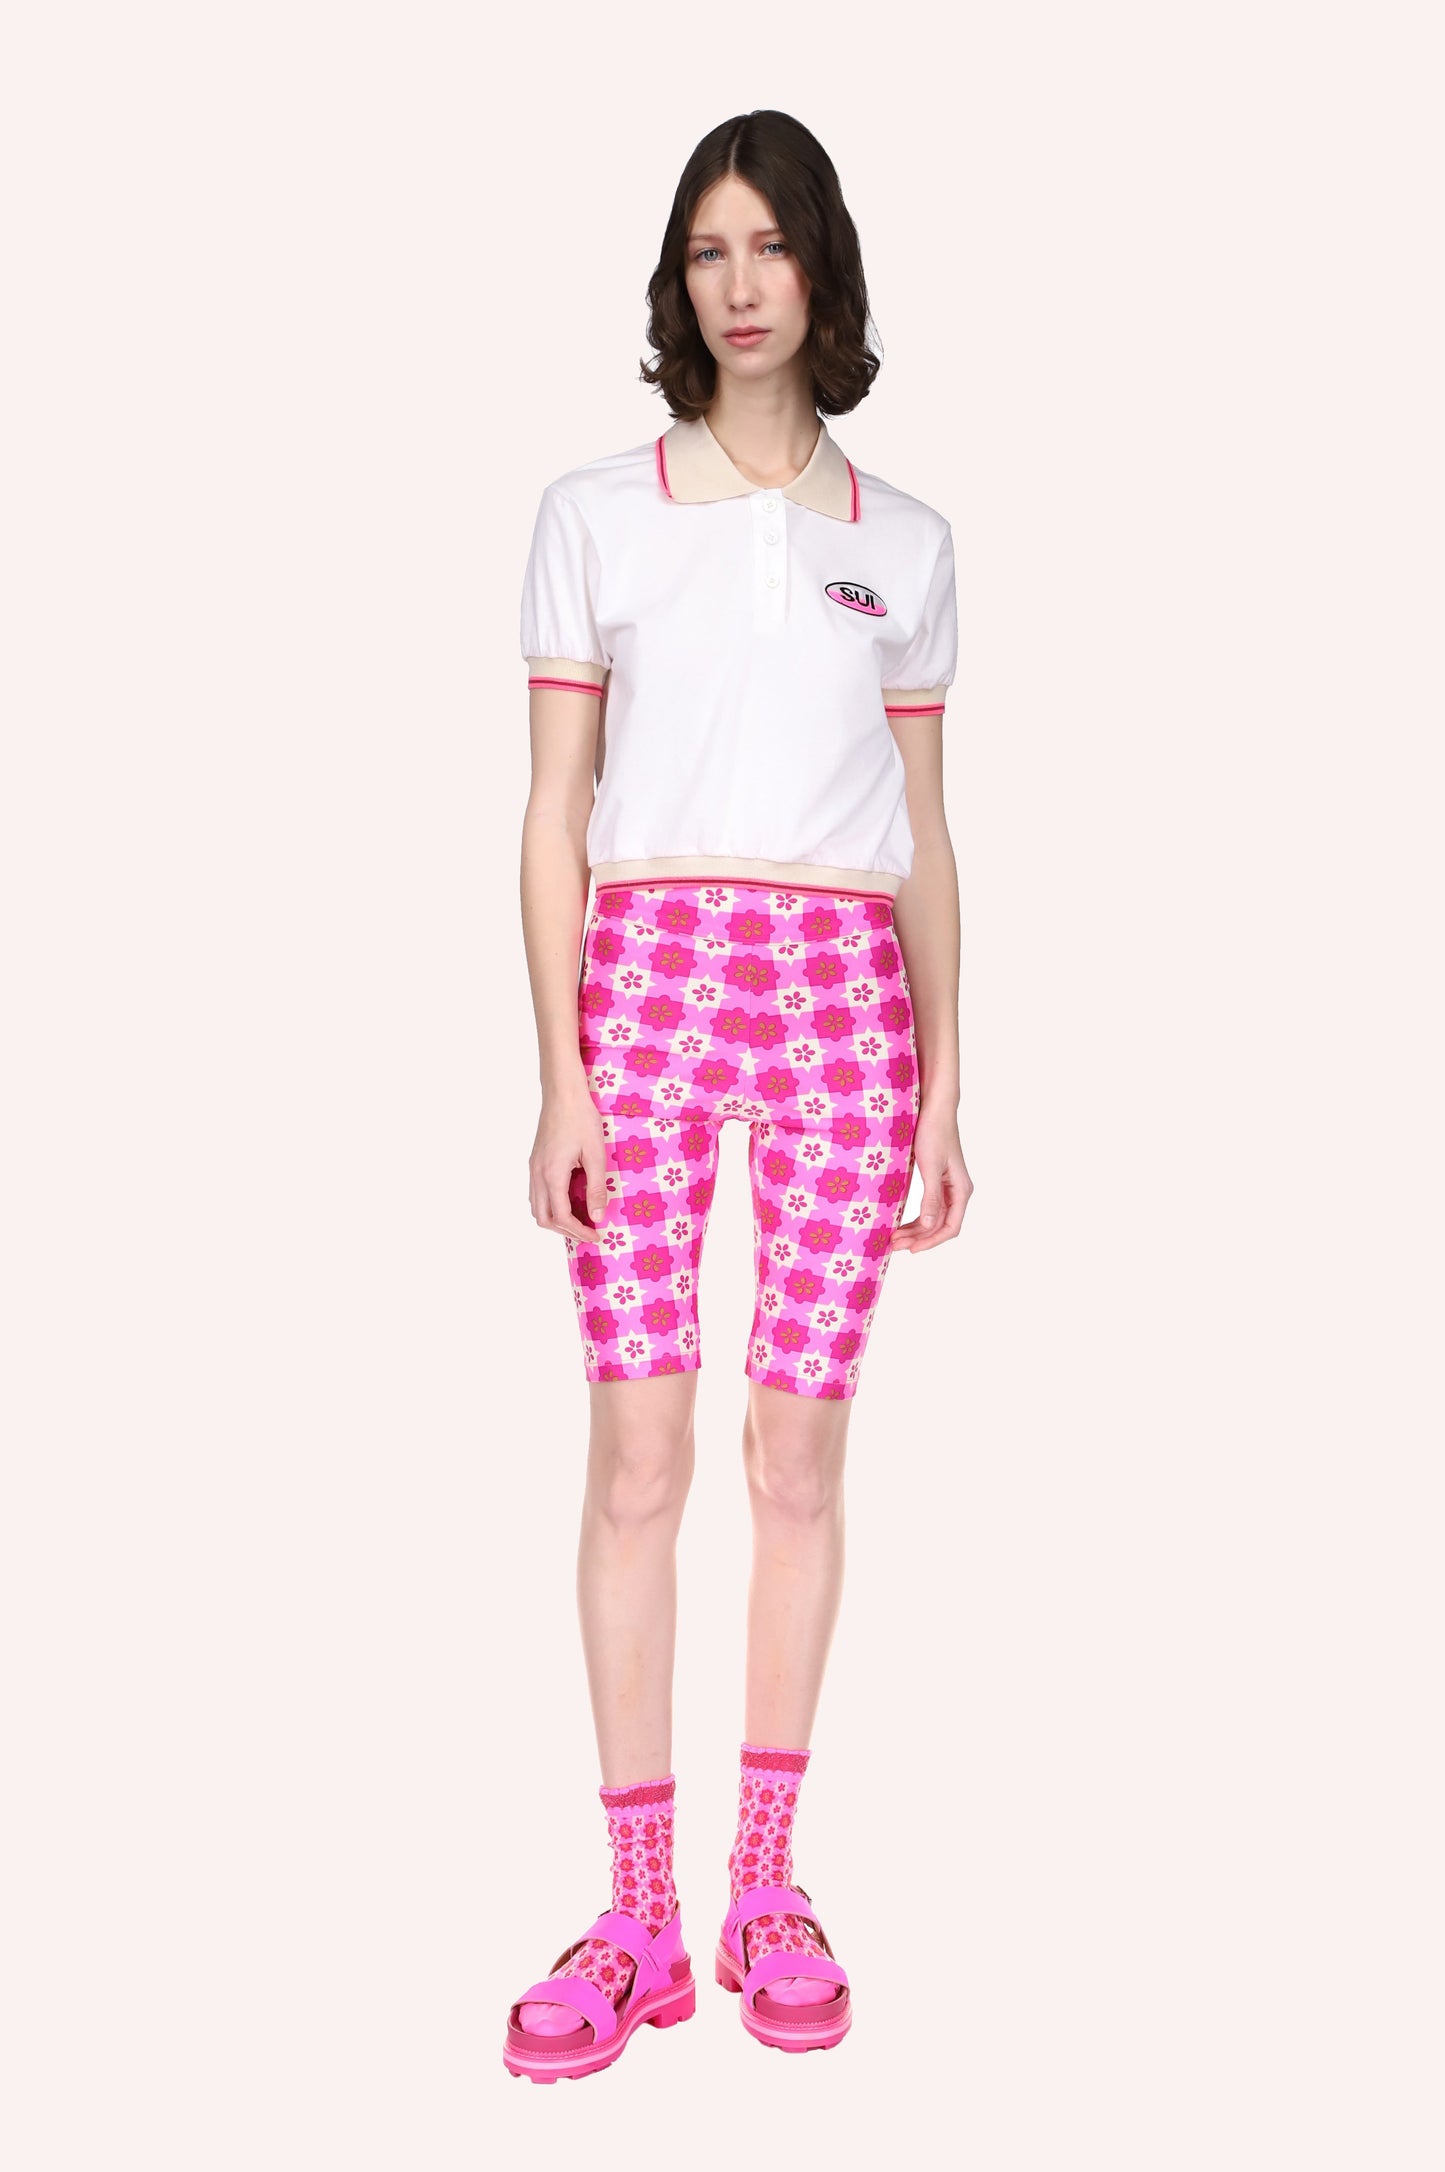 Deco Polo Top Neon Pink, is perfectly matching the Utopian Gingham Bike Shorts Neon Pink